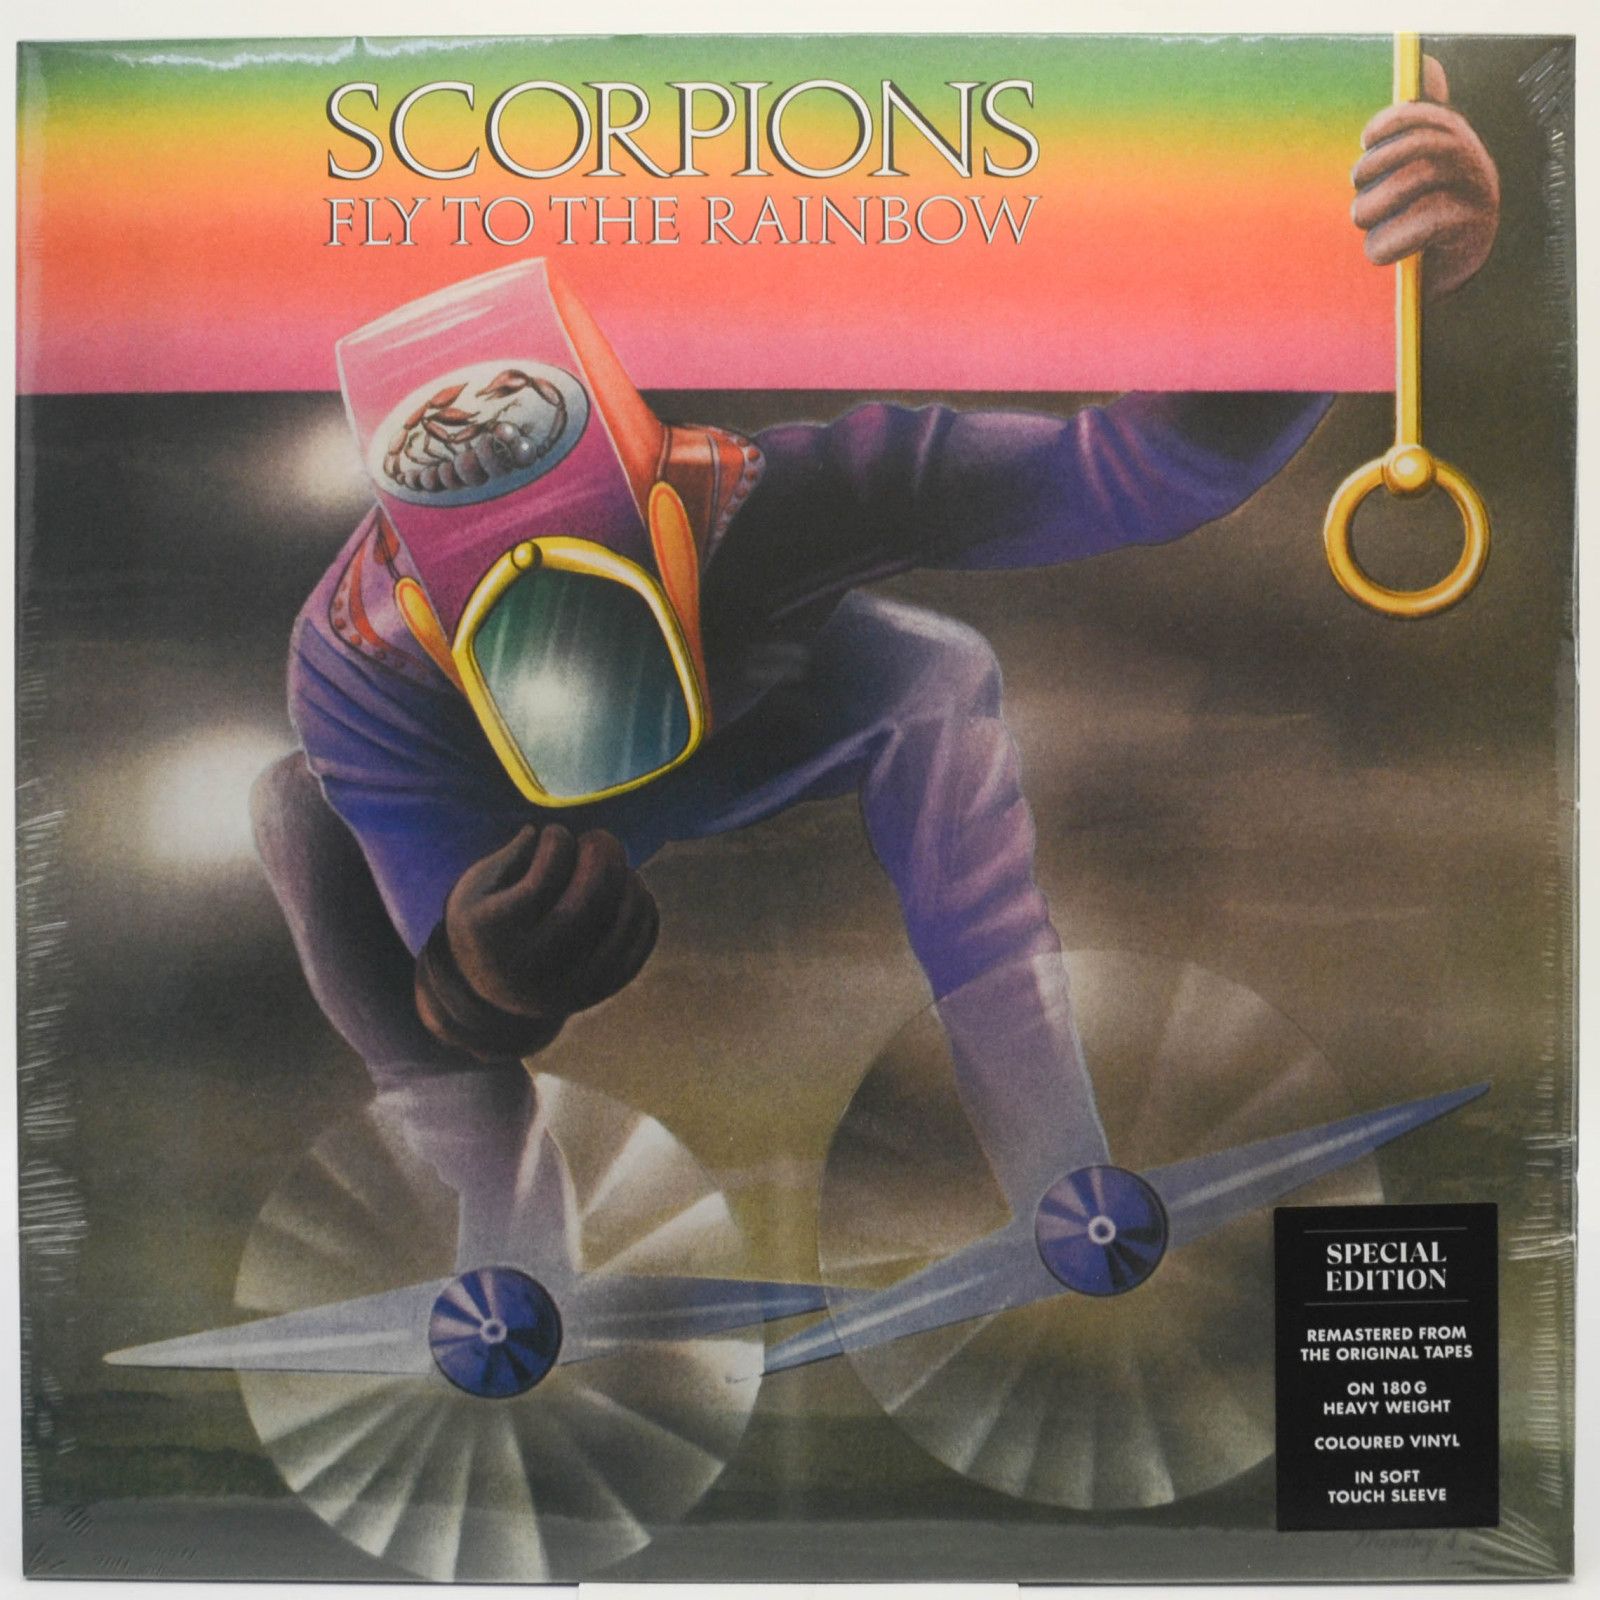 Scorpions — Fly To The Rainbow, 1974